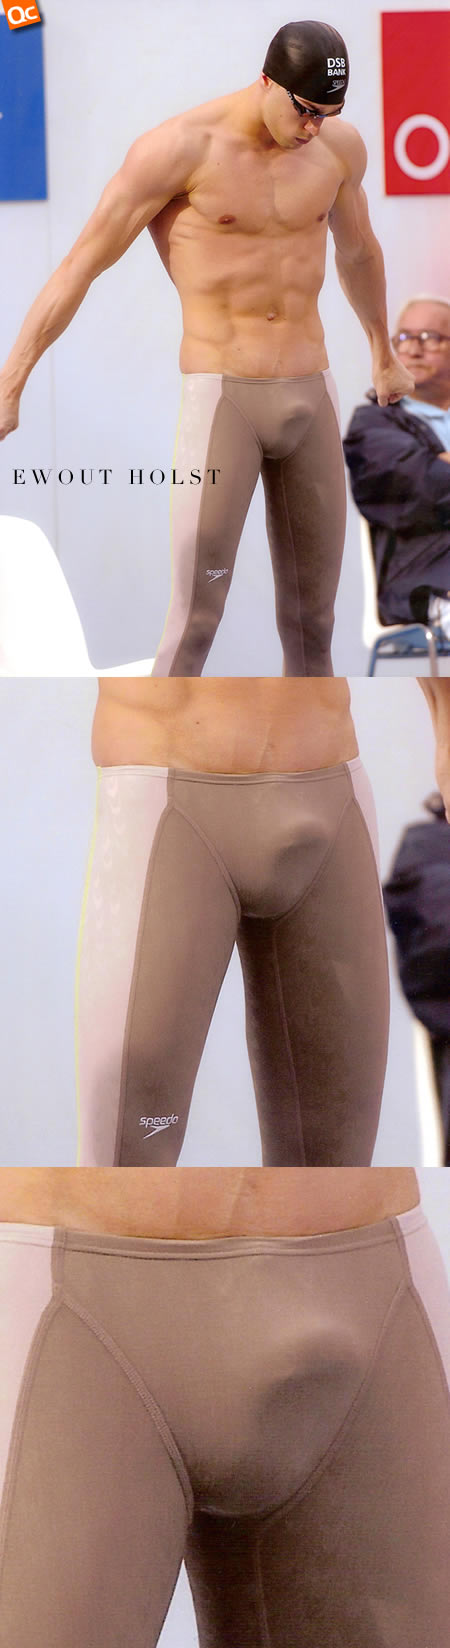 For more sportsmen and celebrity bulges check out The Bulge Report